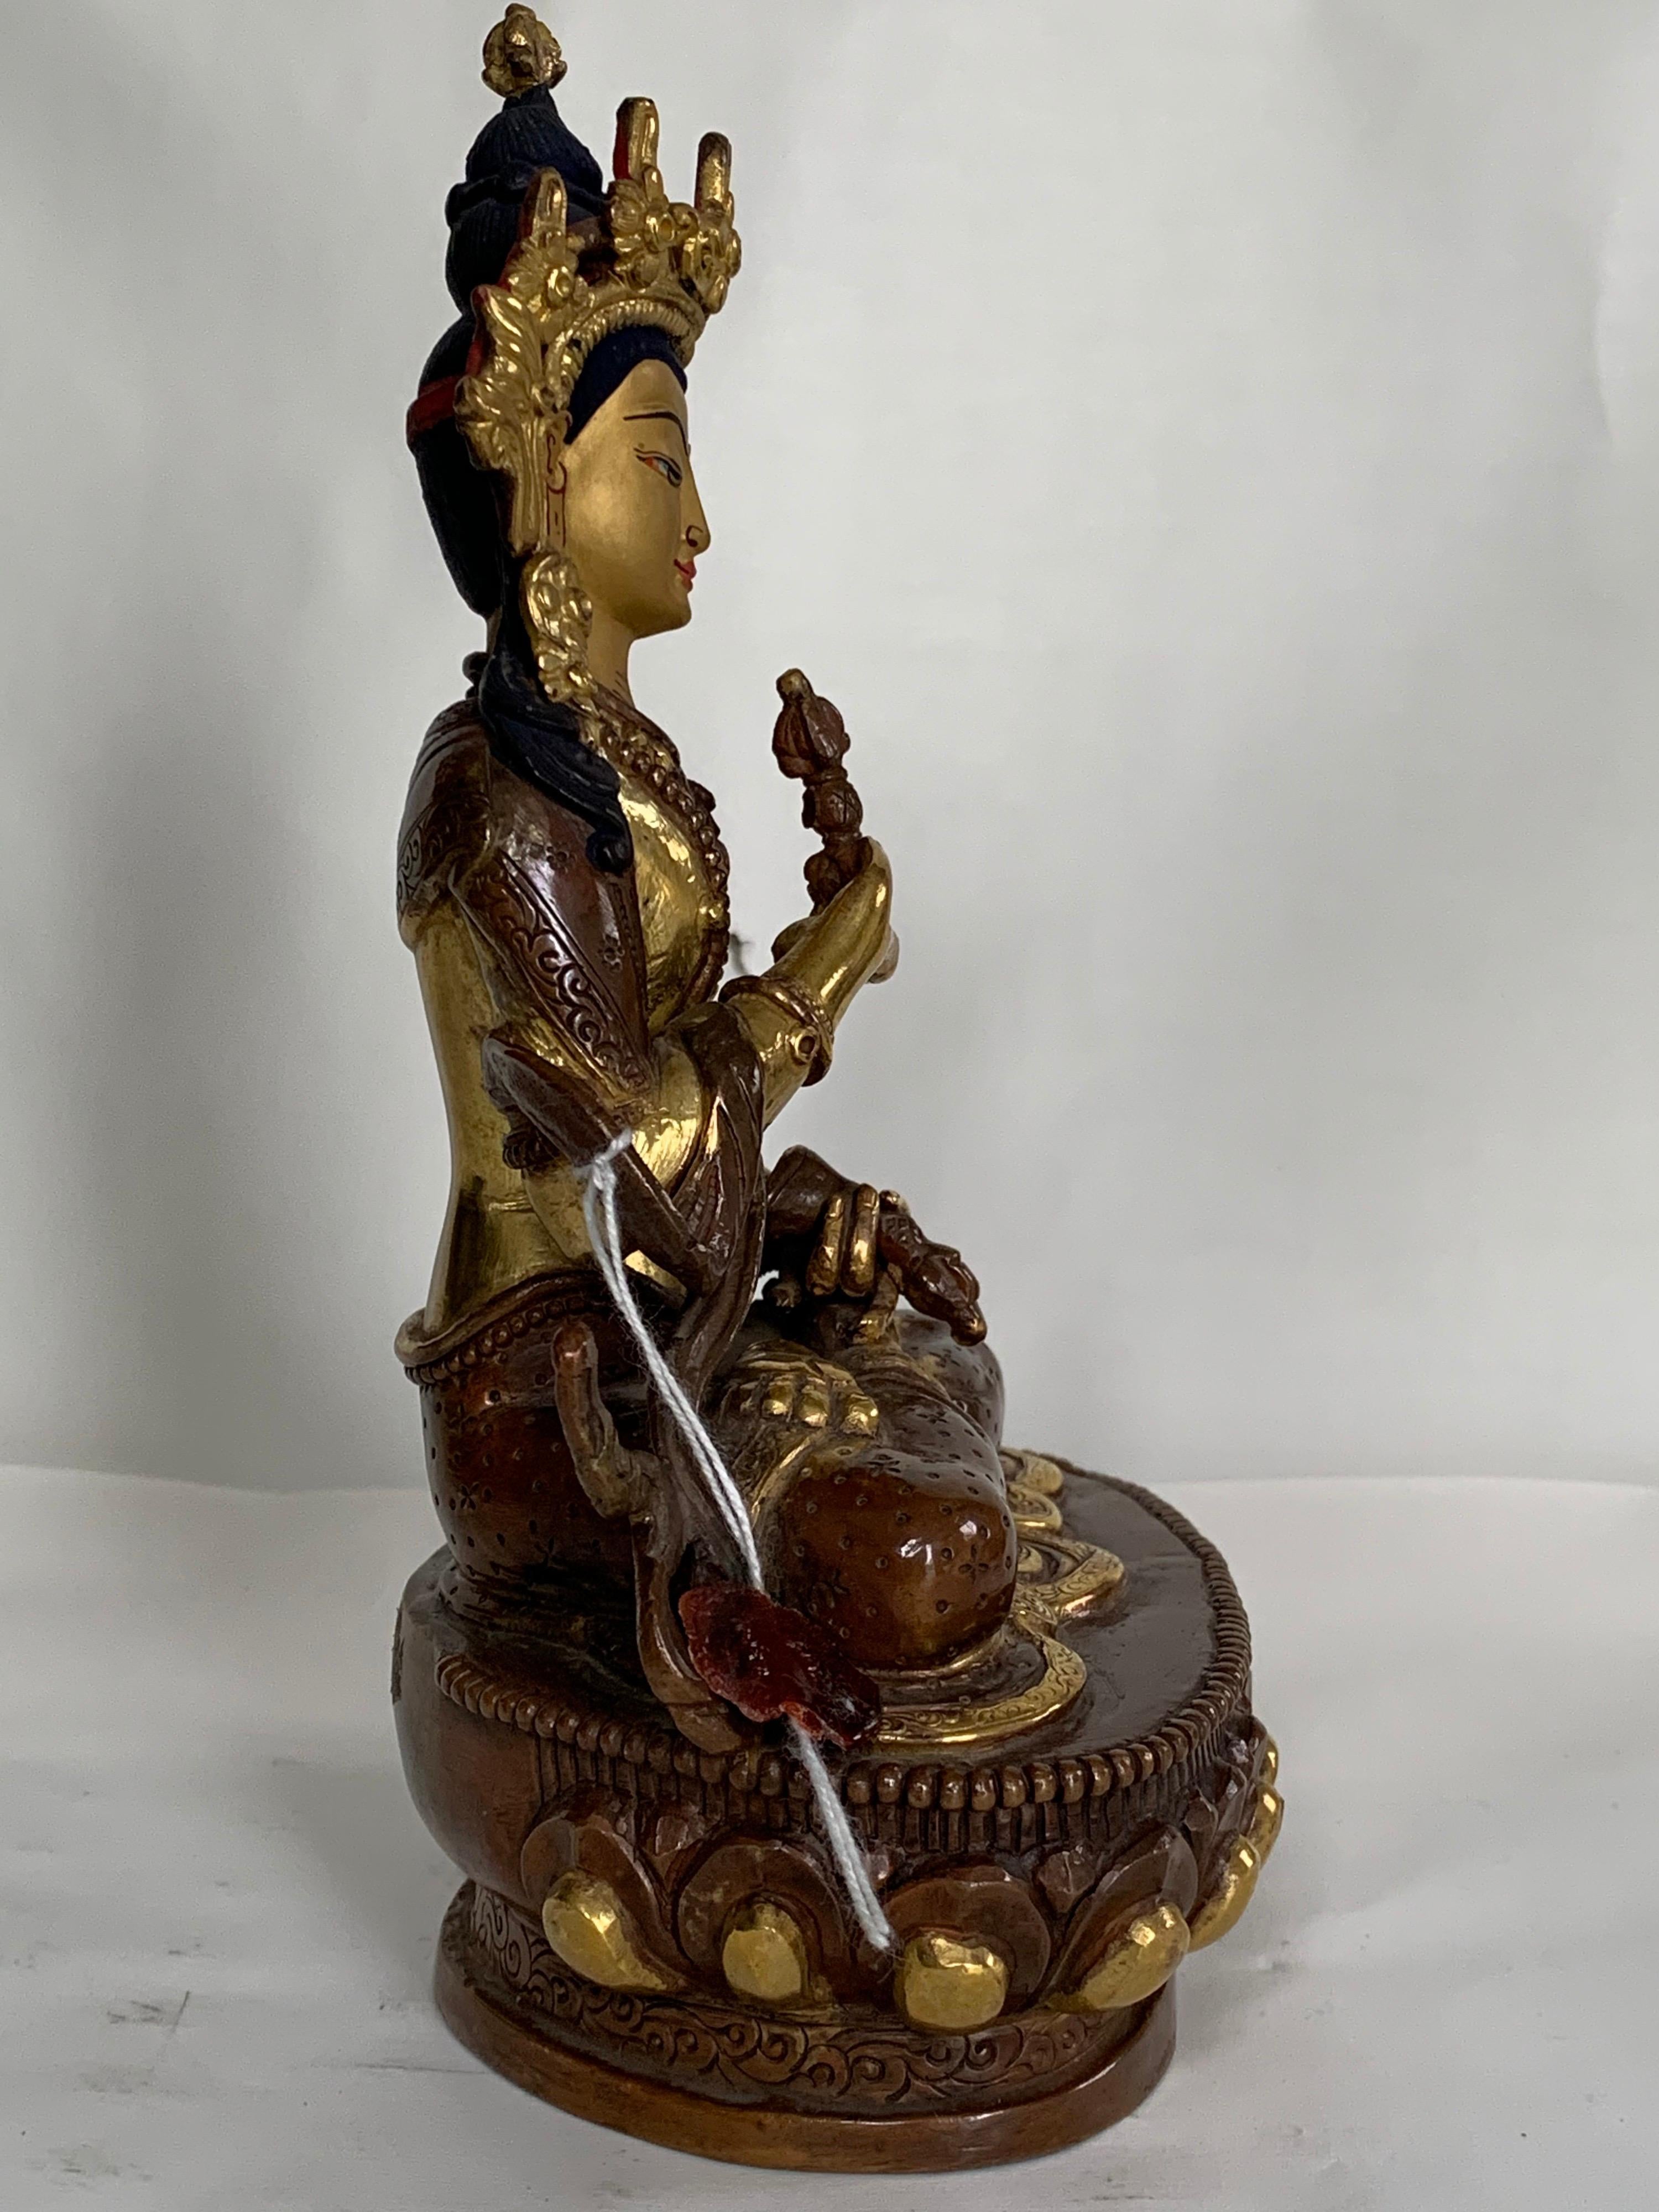 This statue is handcrafted by lost wax process which is one of the ancient process of metal craft. Vajrasattva is seated on lotus with one hand holding a Vajra and the other hand a bell. 24K real gold plating is done on copper body. 
A long process